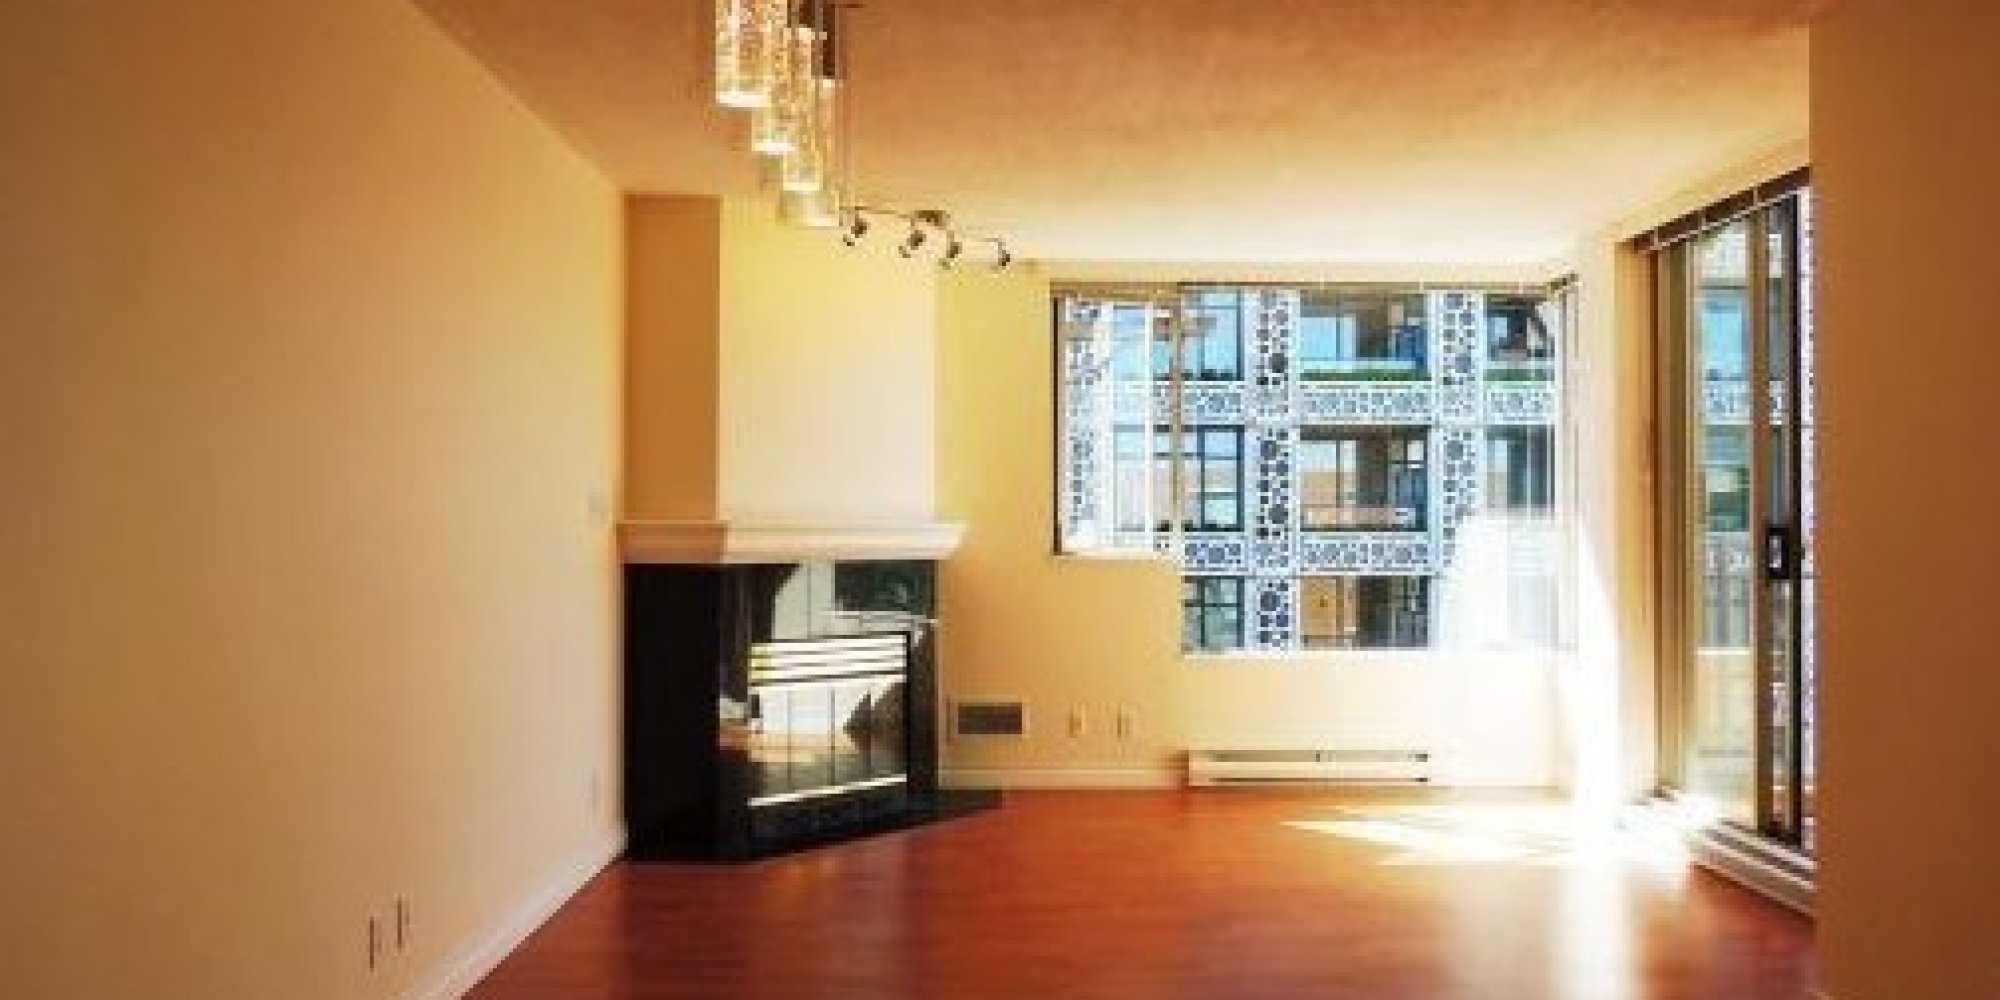 Vancouver Condo For Sale By Developer After 23 Empty Years